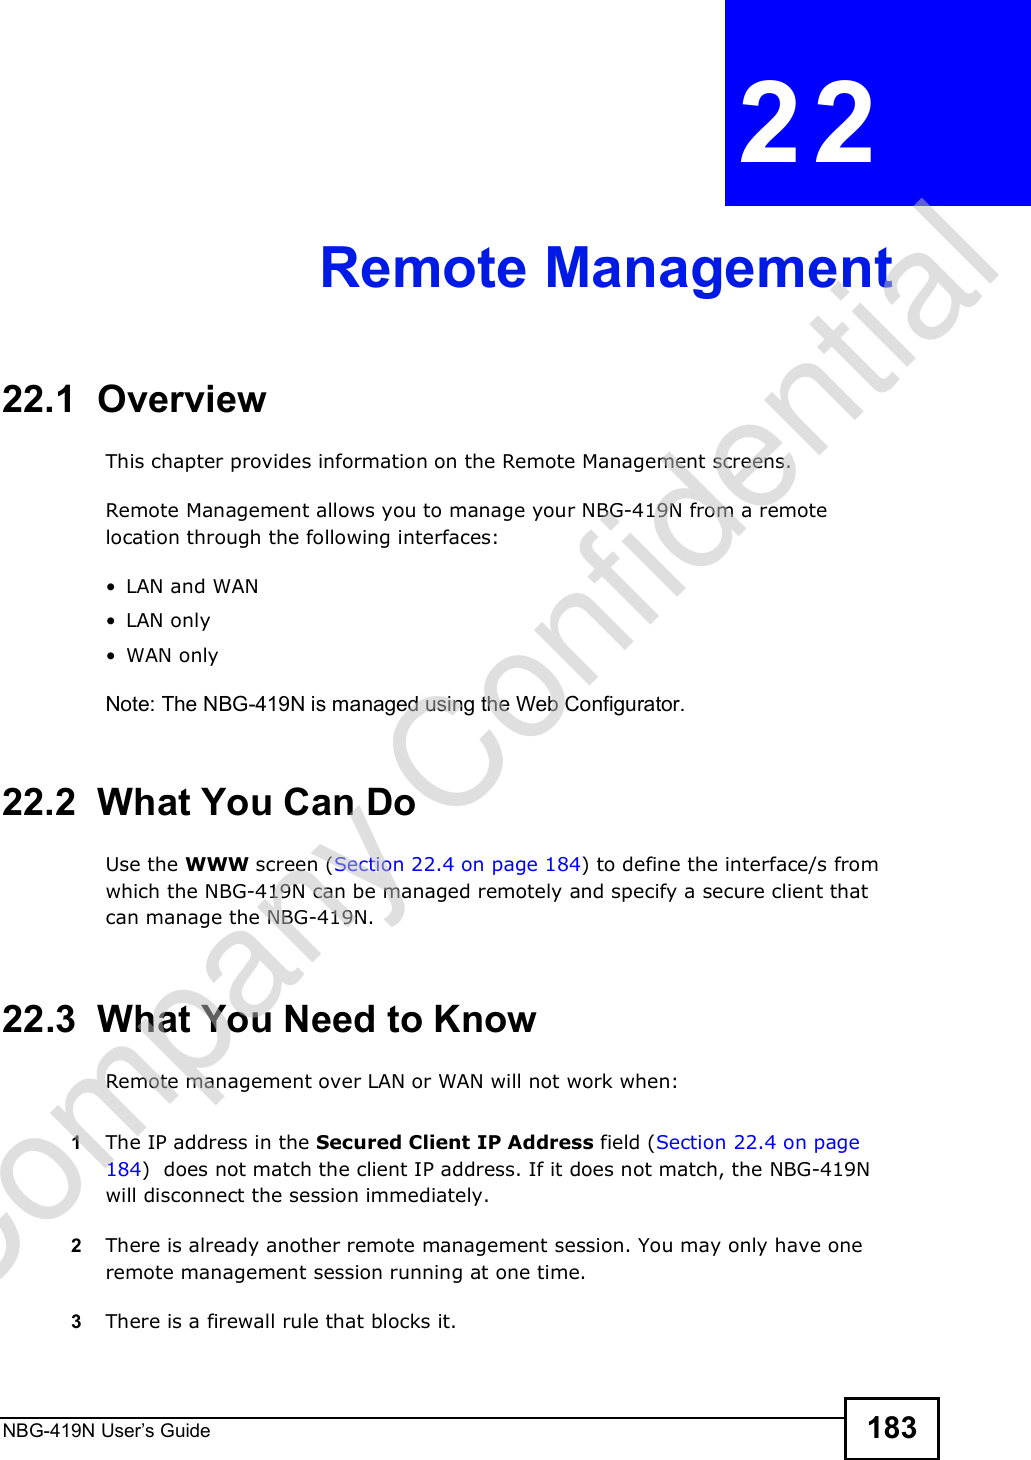 NBG-419N User s Guide 183CHAPTER  22 Remote Management22.1  OverviewThis chapter provides information on the Remote Management screens. Remote Management allows you to manage your NBG-419N from a remote location through the following interfaces: LAN and WAN LAN only WAN onlyNote: The NBG-419N is managed using the Web Configurator.22.2  What You Can DoUse the WWW screen (Section 22.4 on page 184) to define the interface/s from which the NBG-419N can be managed remotely and specify a secure client that can manage the NBG-419N.22.3  What You Need to KnowRemote management over LAN or WAN will not work when:1The IP address in the Secured Client IP Address field (Section 22.4 on page 184)  does not match the client IP address. If it does not match, the NBG-419N will disconnect the session immediately.2There is already another remote management session. You may only have one remote management session running at one time.3There is a firewall rule that blocks it.Company Confidential